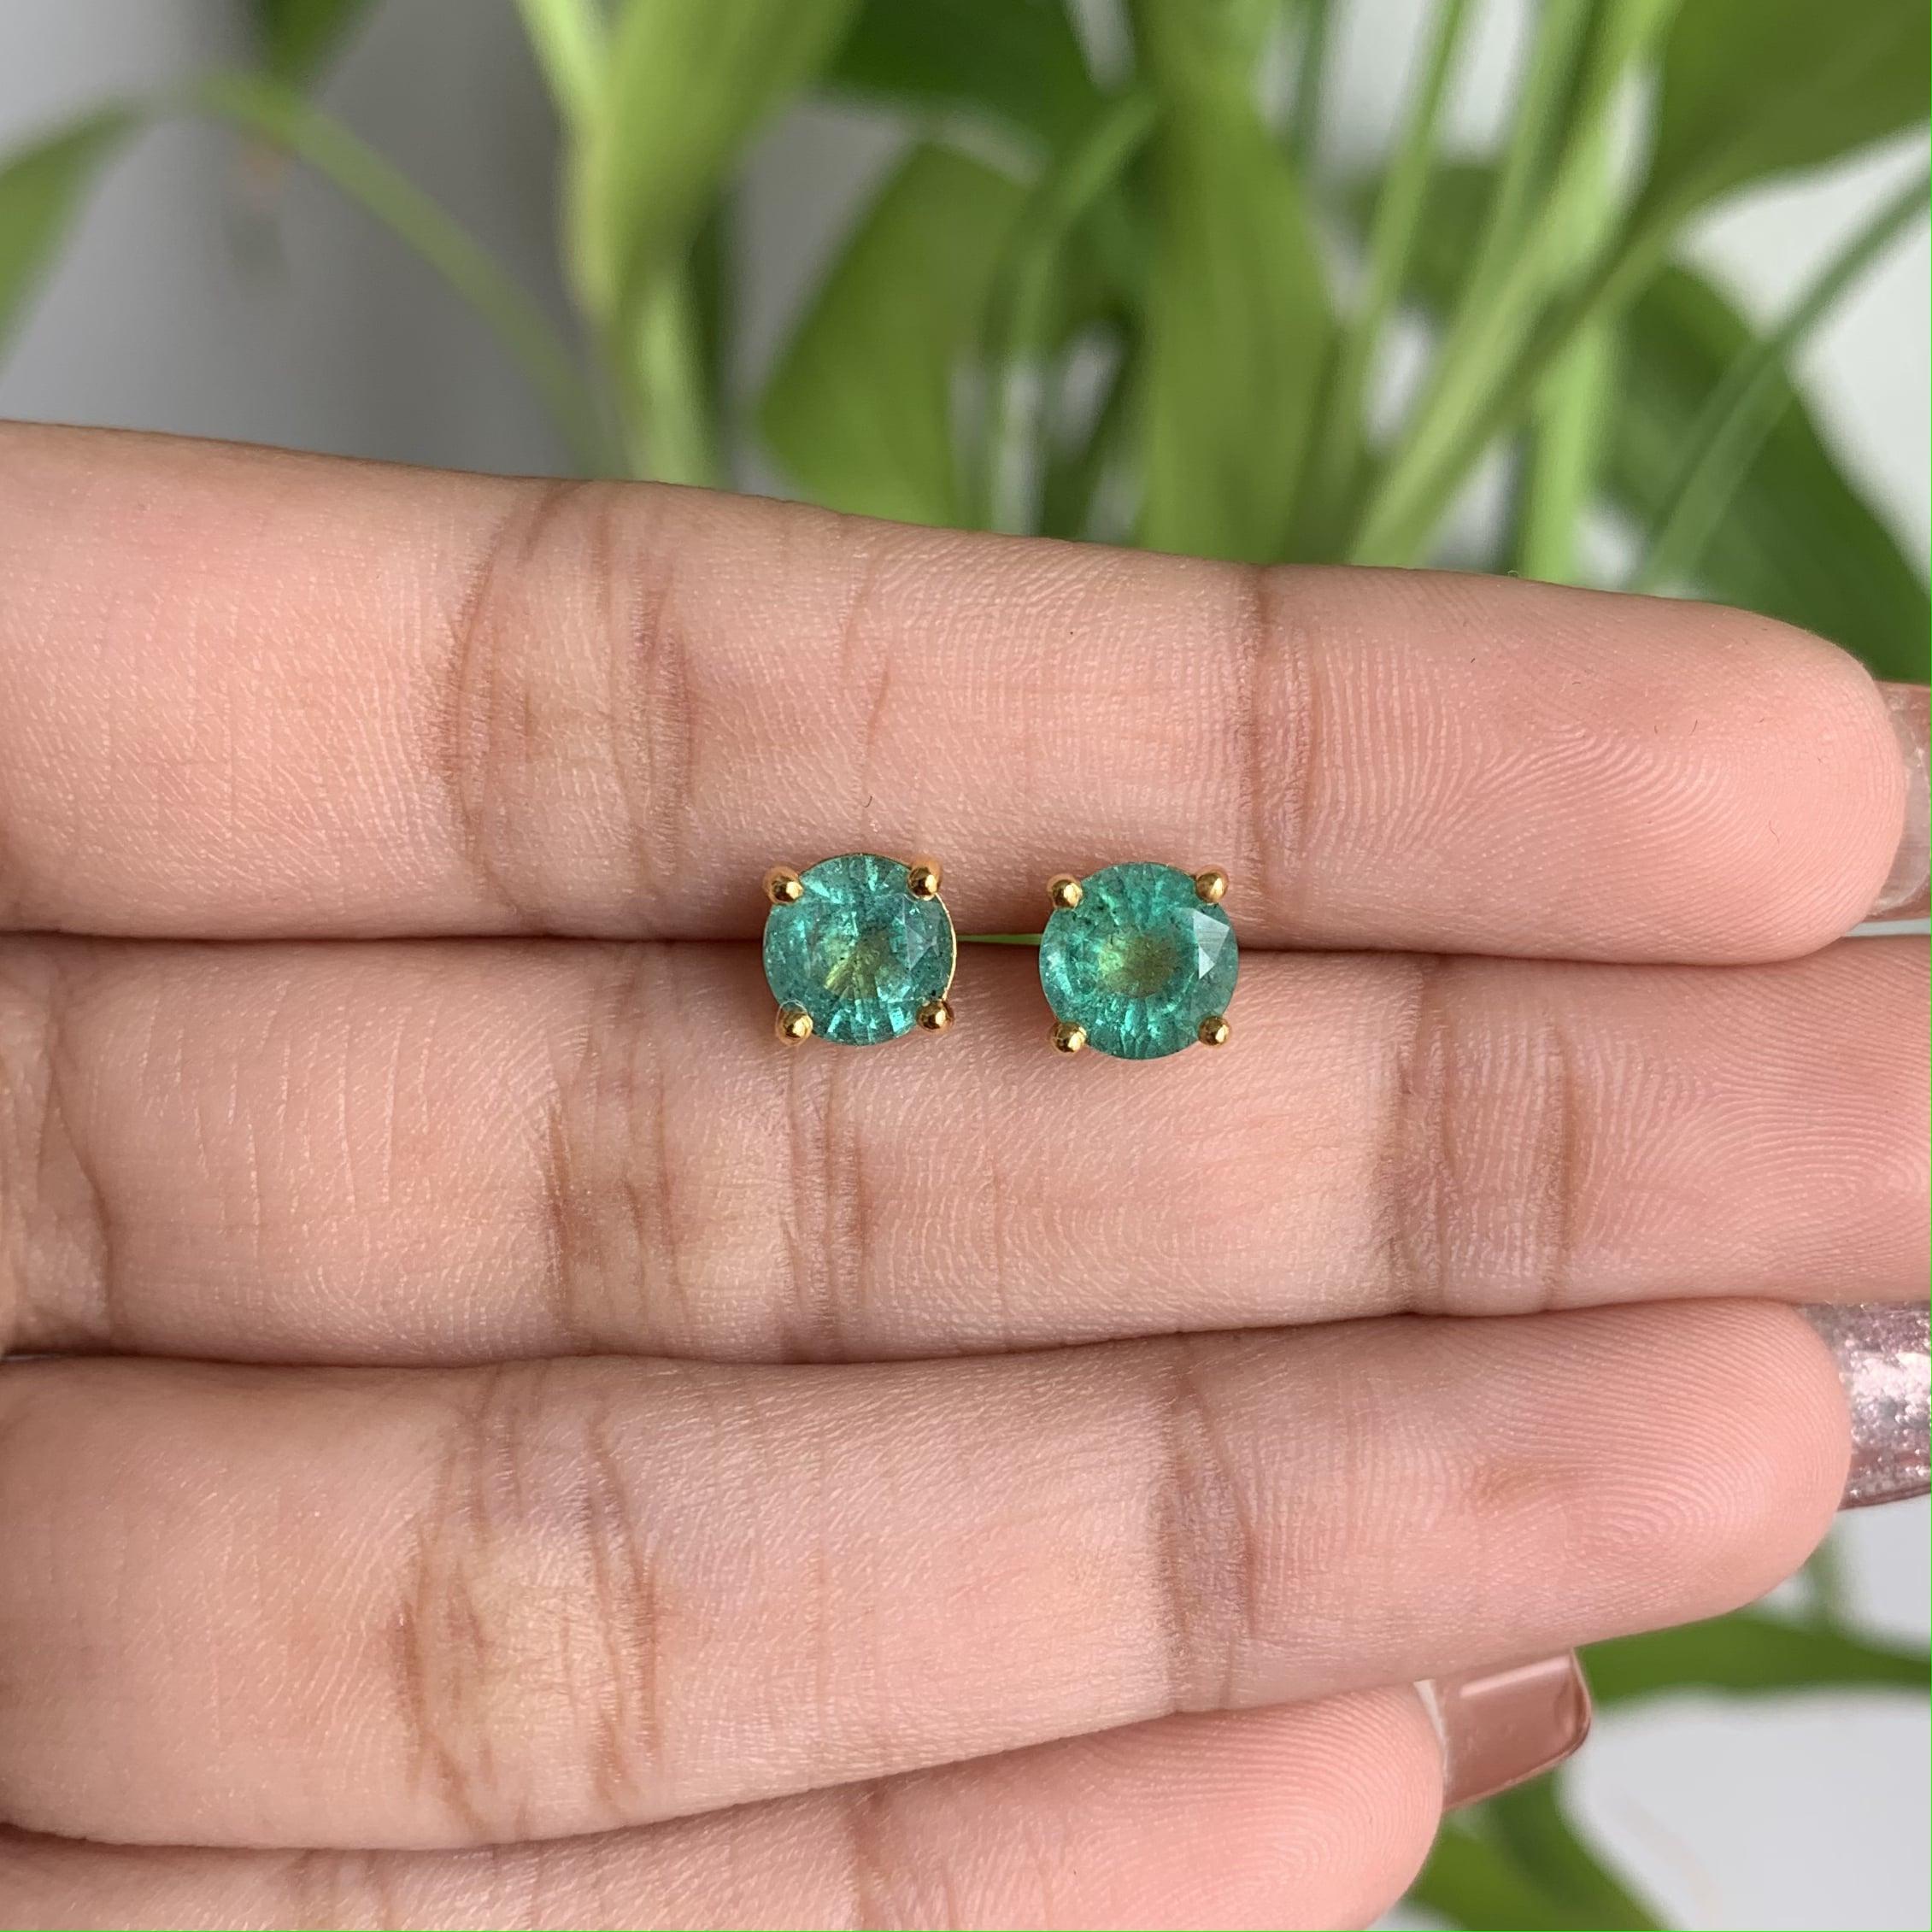 In search of a timeless set of everyday Emerald stud earrings? Your quest ends here with these exquisite Emerald studs!

With a combined weight of 1.60 Carats, these round-shaped emeralds boast a captivating and vibrant green hue that's bound to